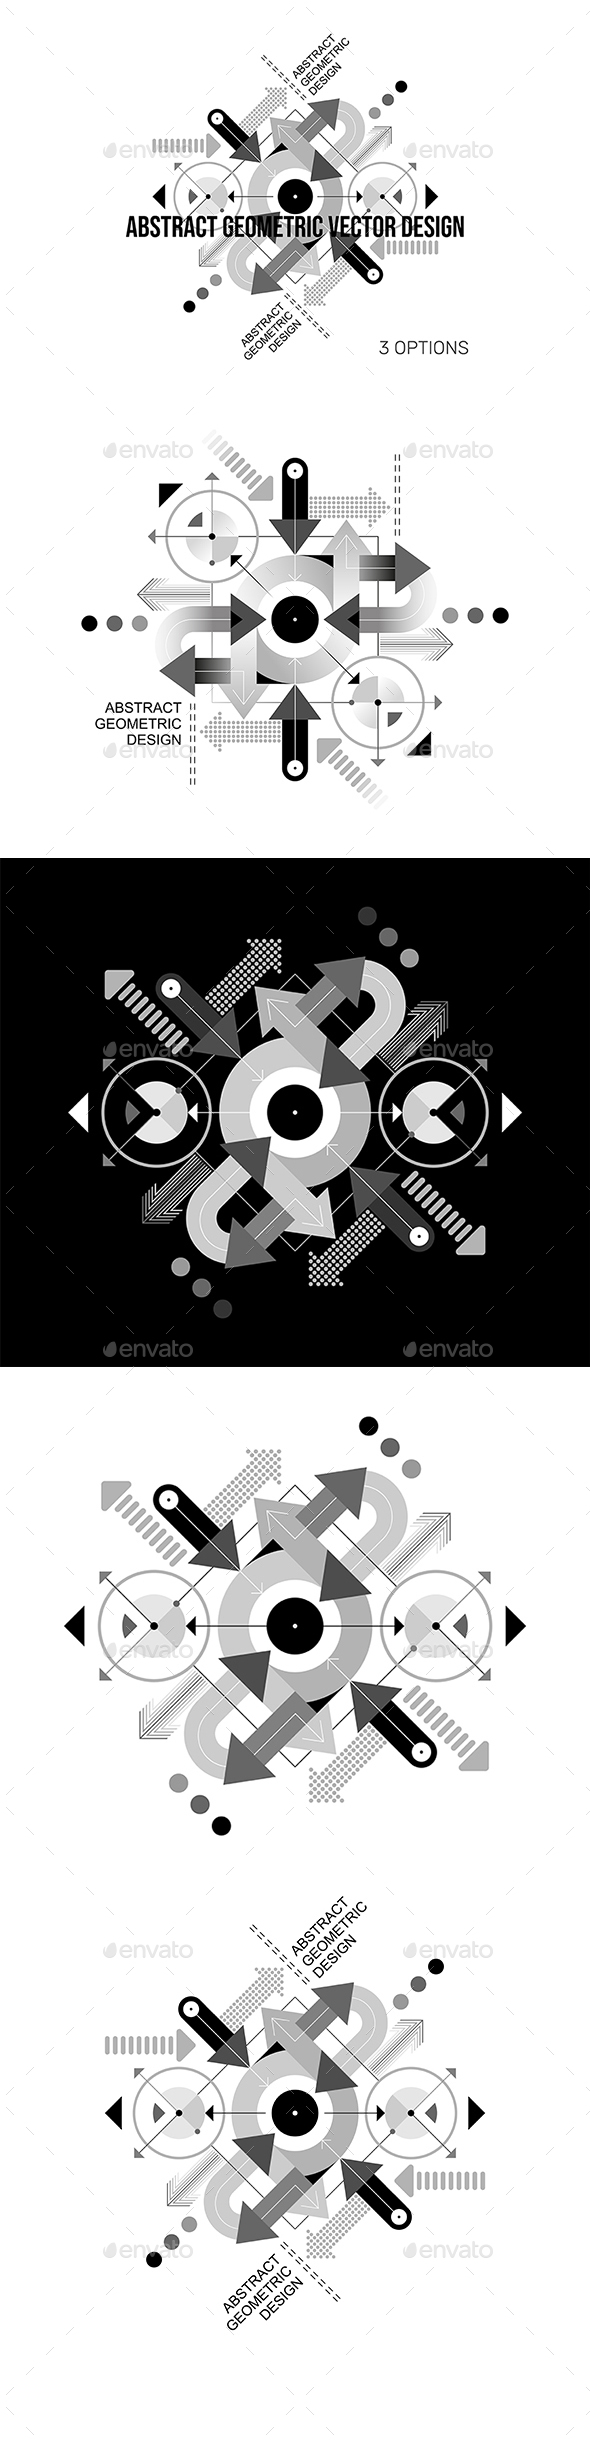 Greyscale Abstract Geometric Vector Design